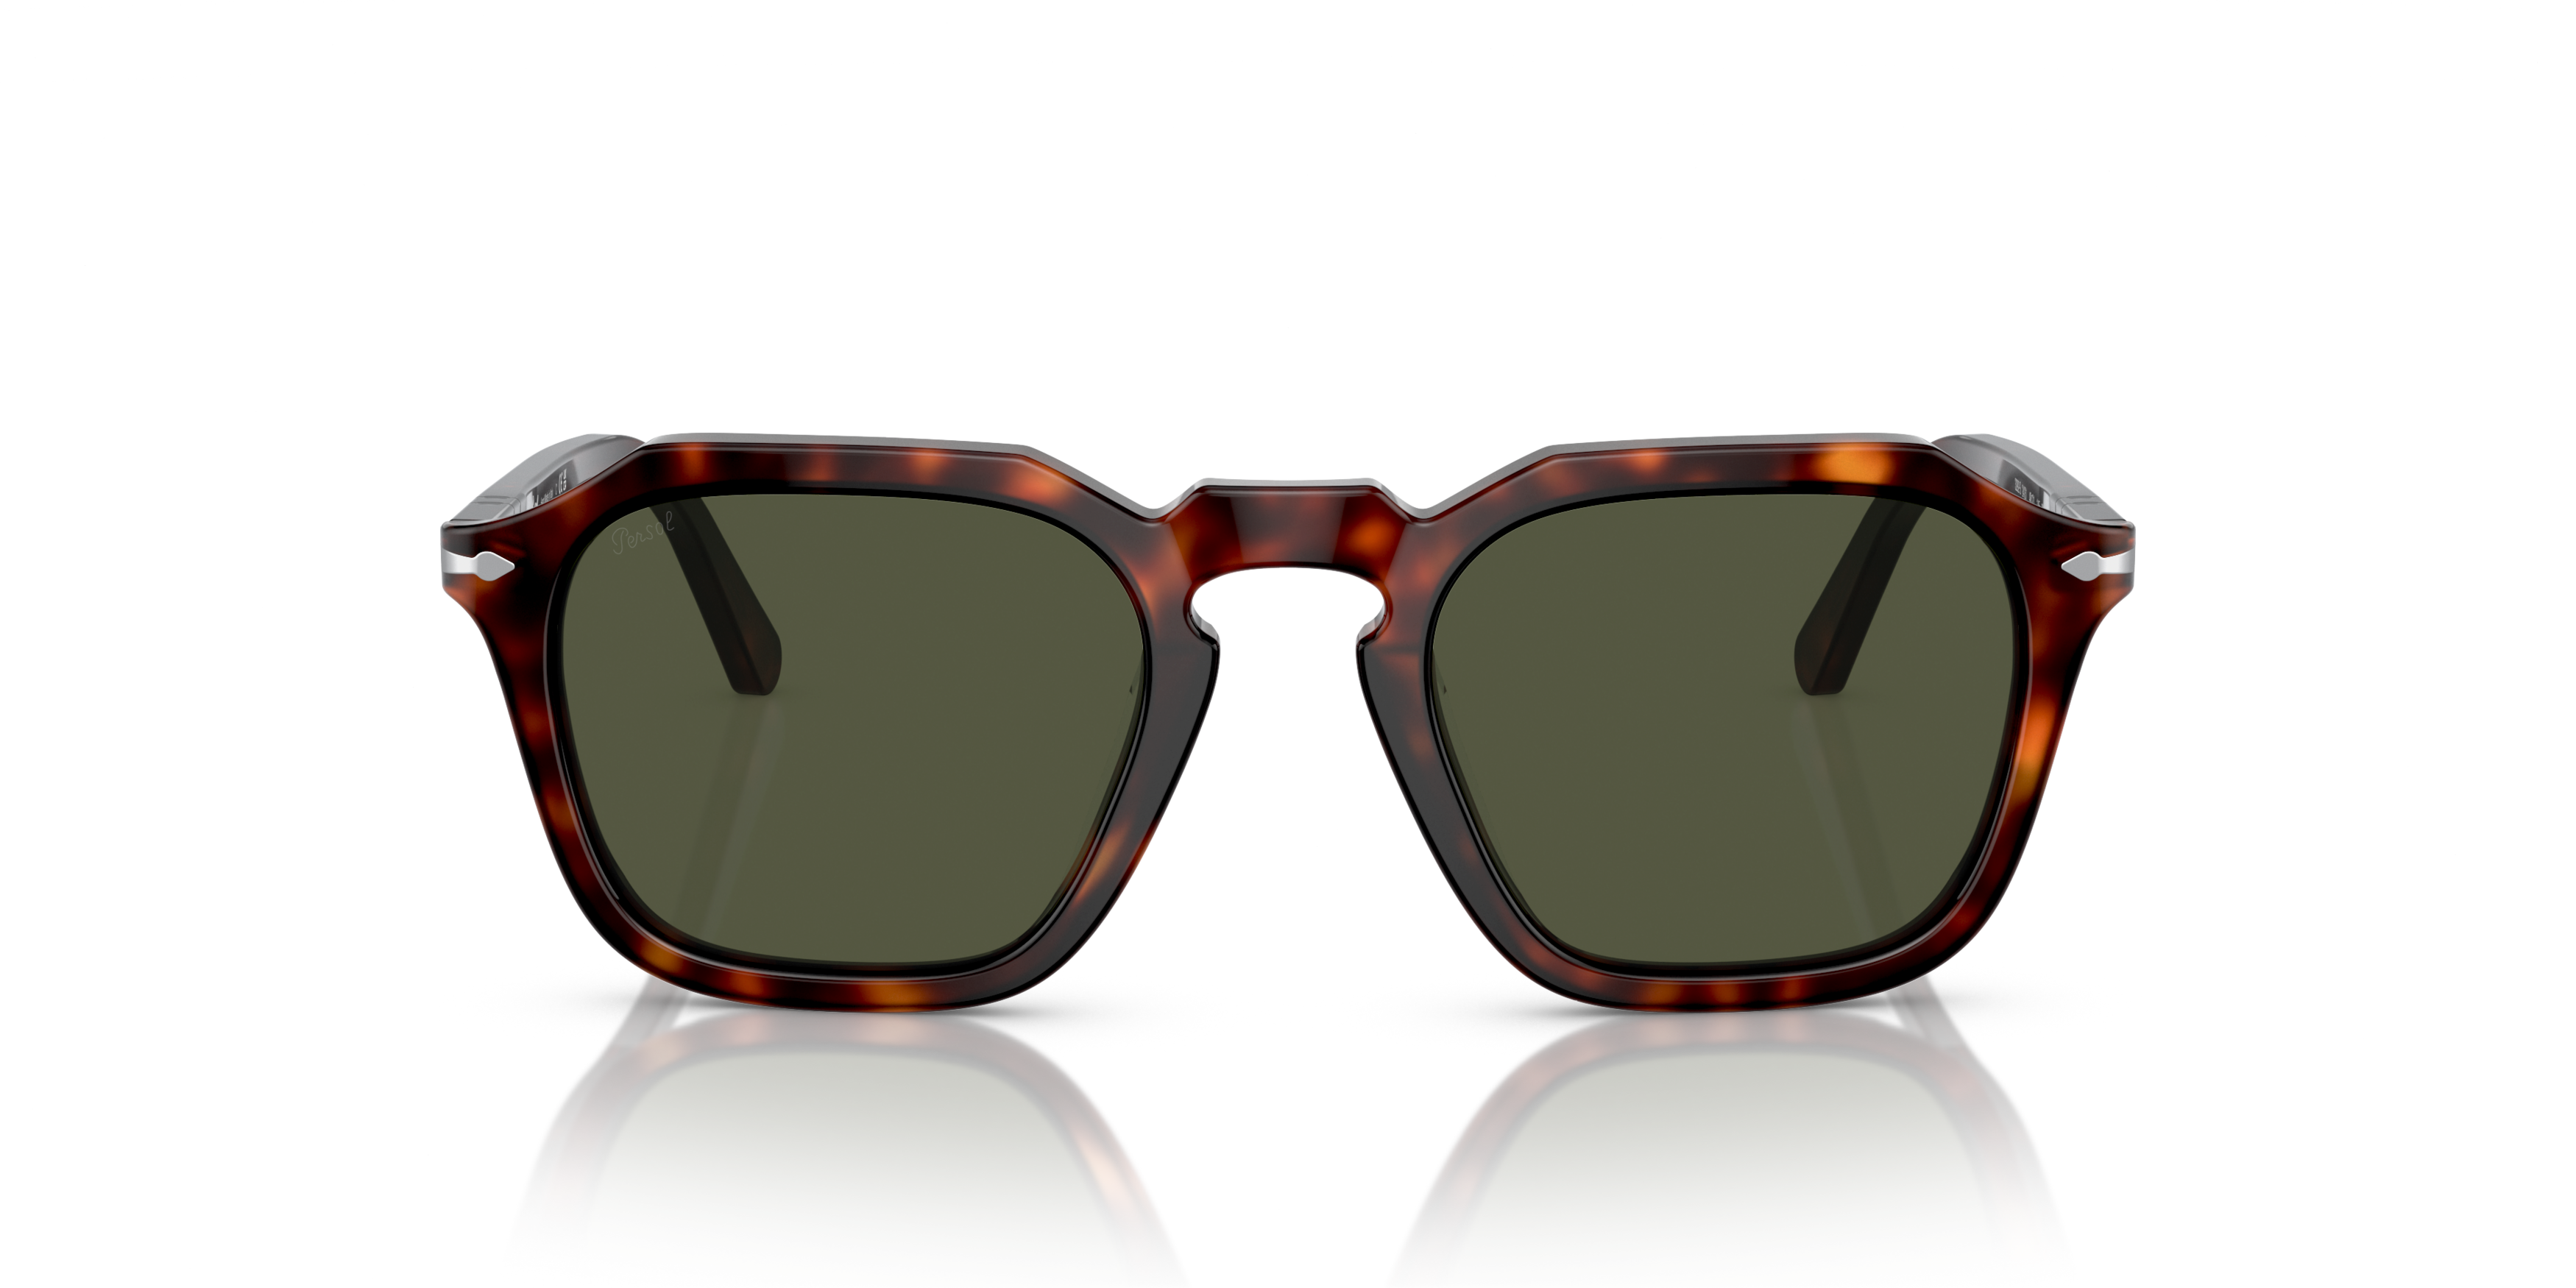 [products.image.front] PERSOL PO3292S 24/31